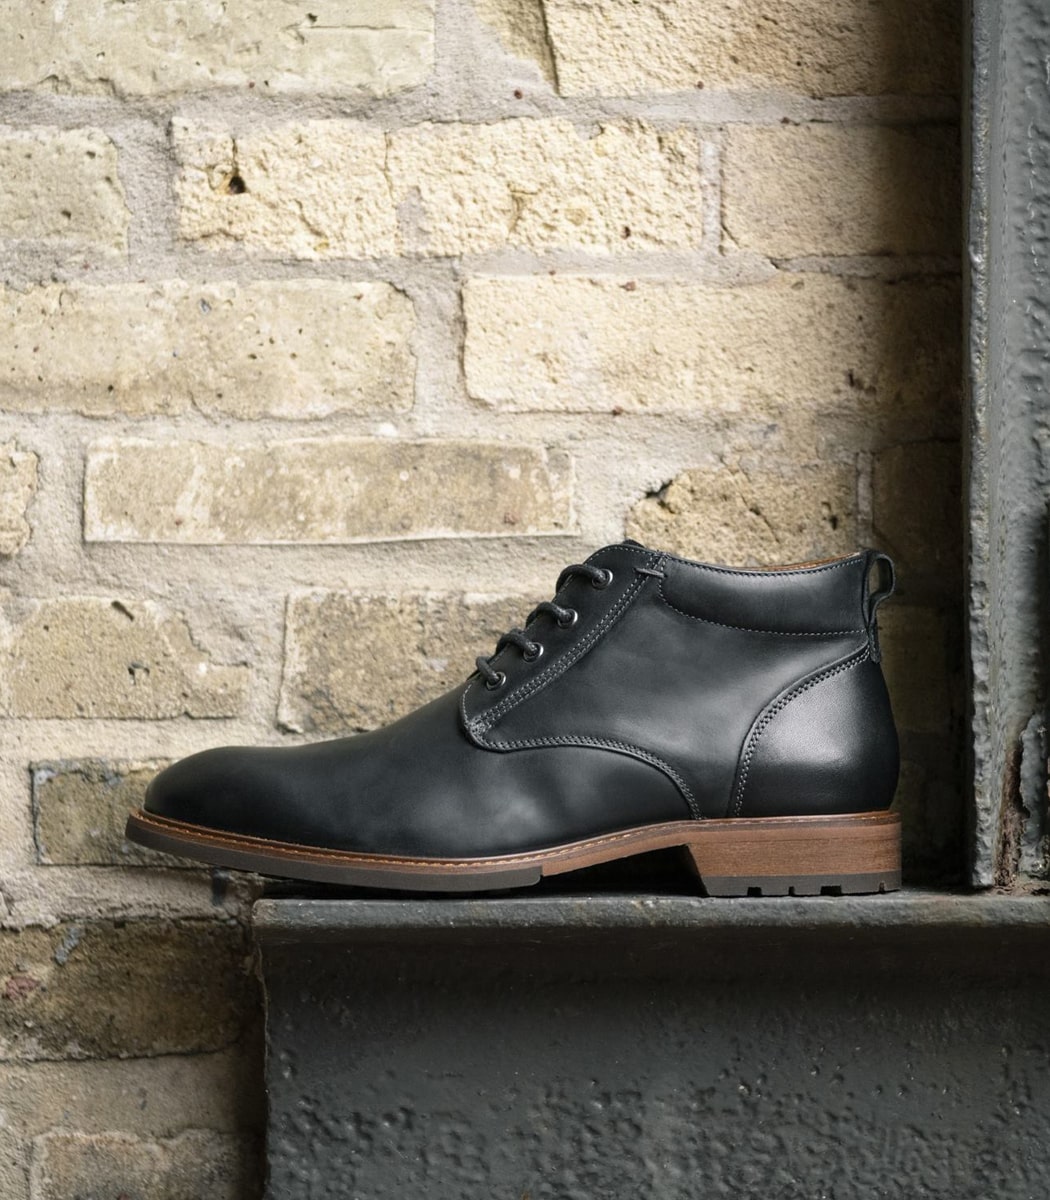 The featured shoe is the Lodge Plain Toe Chukka Boot in Black Crazy Horse.